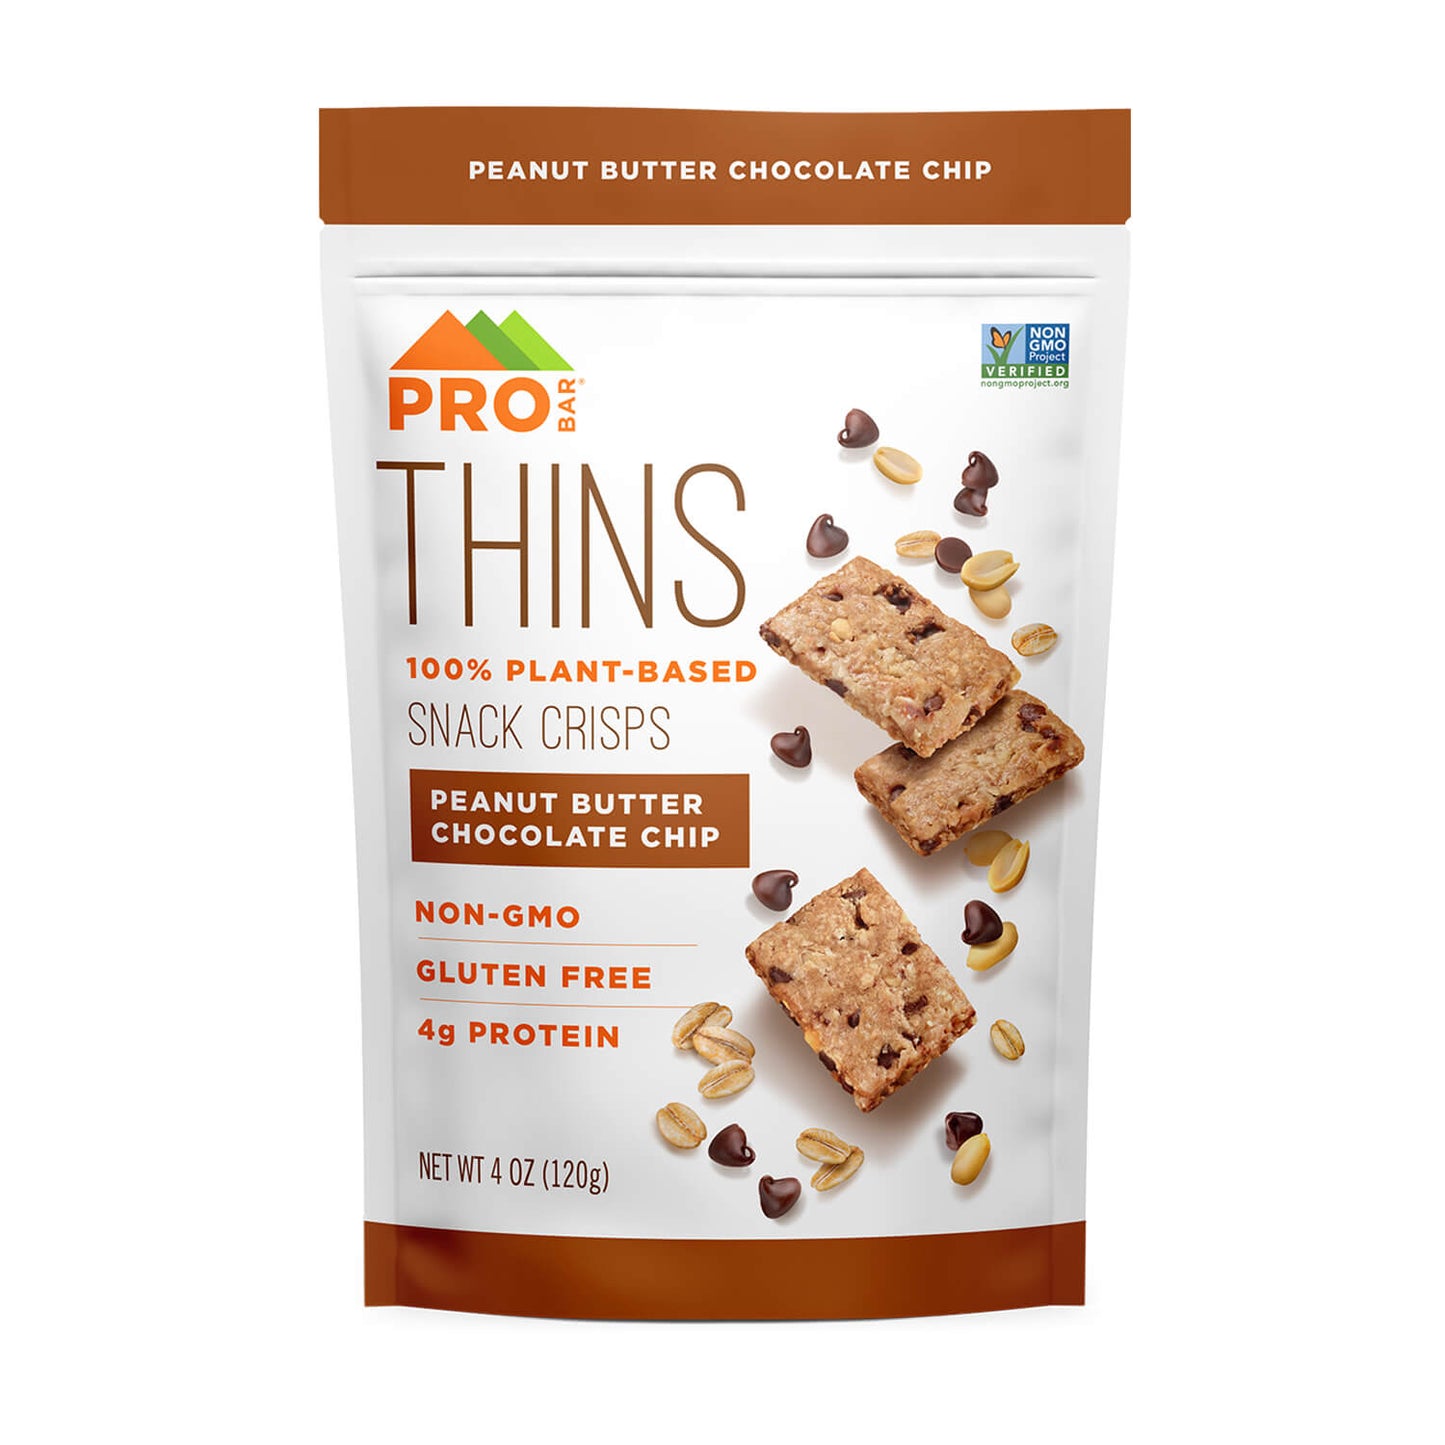 Peanut Butter Chocolate Chip 4 oz. Pouch 3 Pack